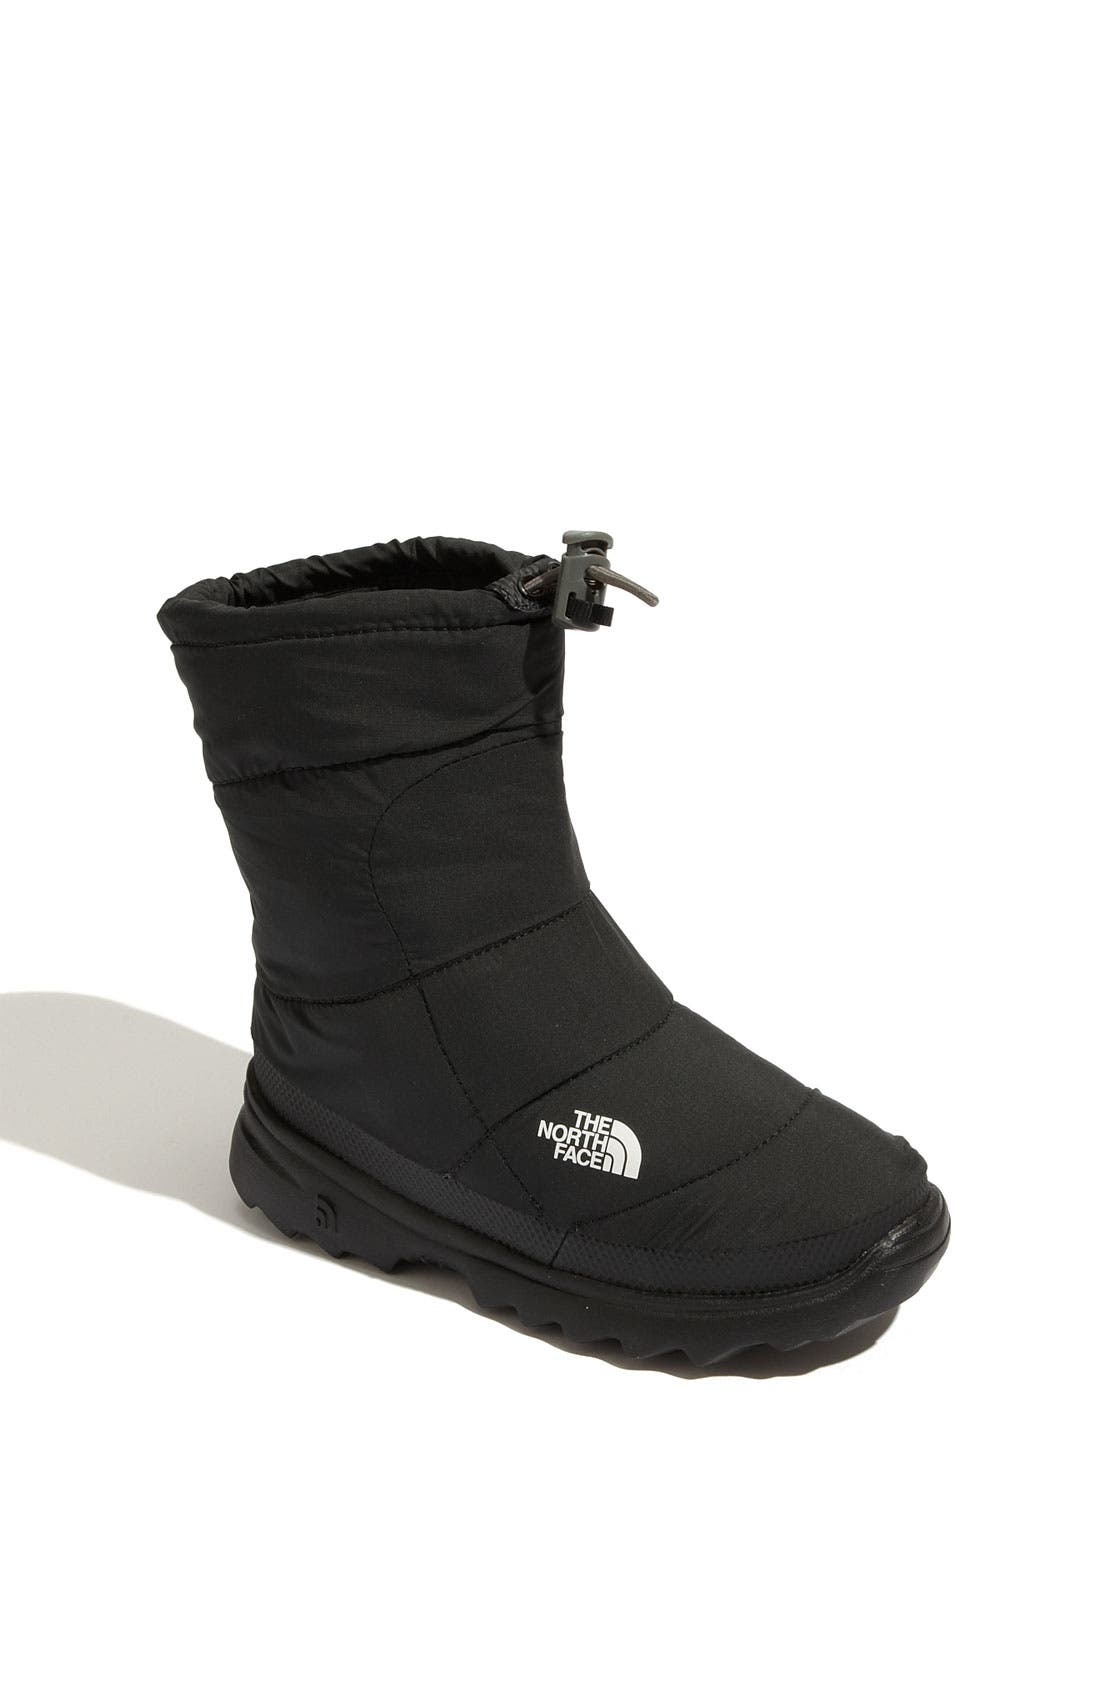 The North Face 'Nuptse' Boot (Little 